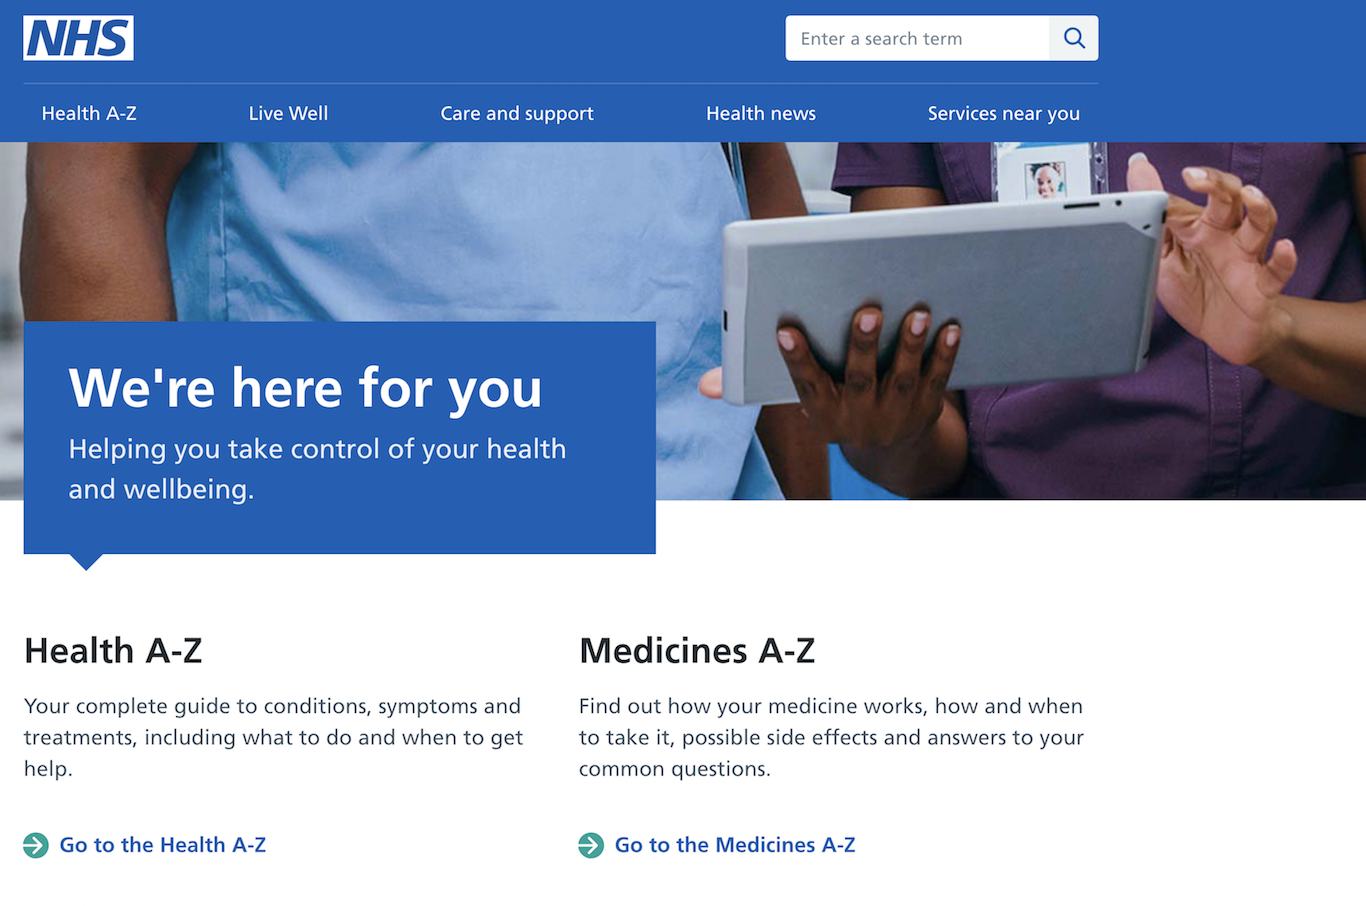 Home page of nhs.uk